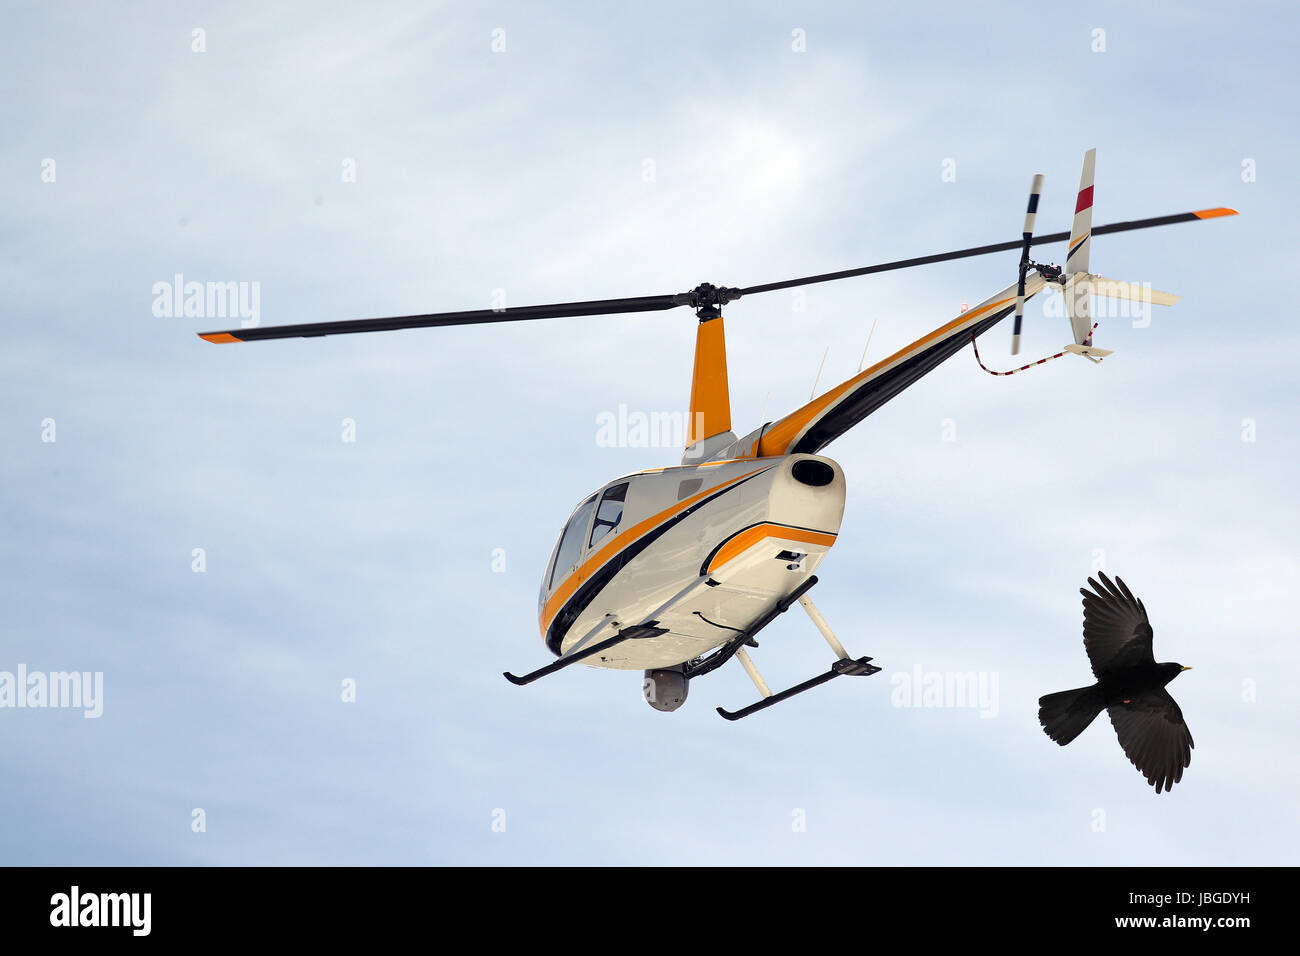 Small turbine helicopter in flight with camera and FLIR equipment in front of an alpine chough, pyrrhocorax graculus, with open wings Stock Photo